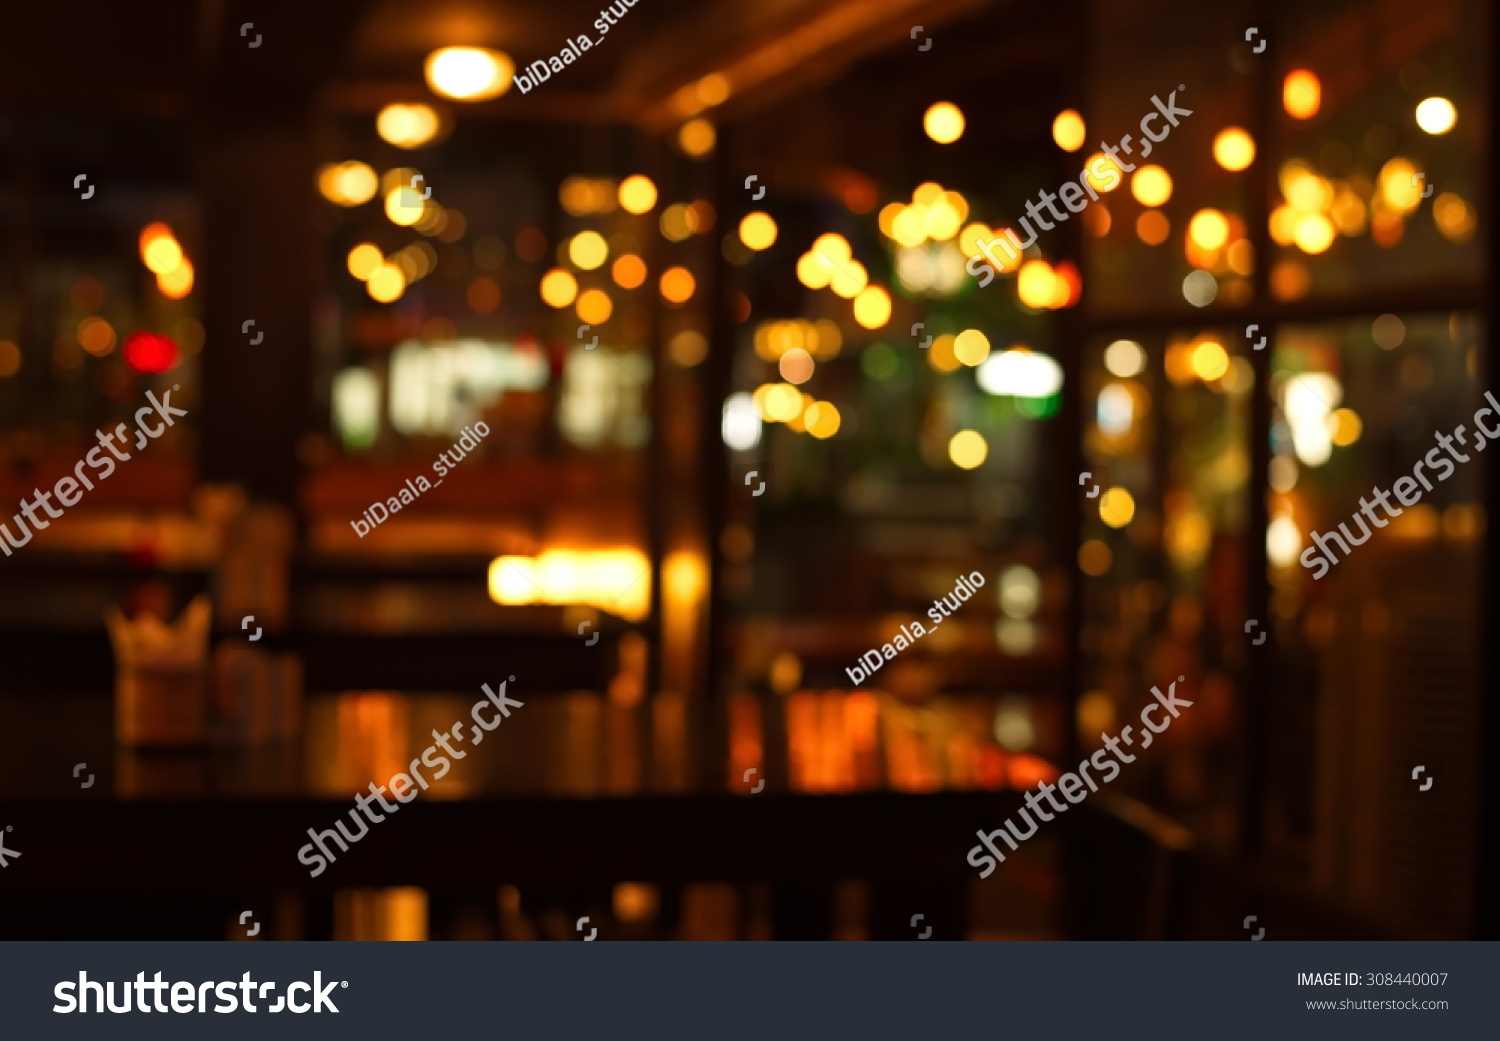 Table In Blur Pub And Restaurant At Night With Bokeh Light Stock Photo ...